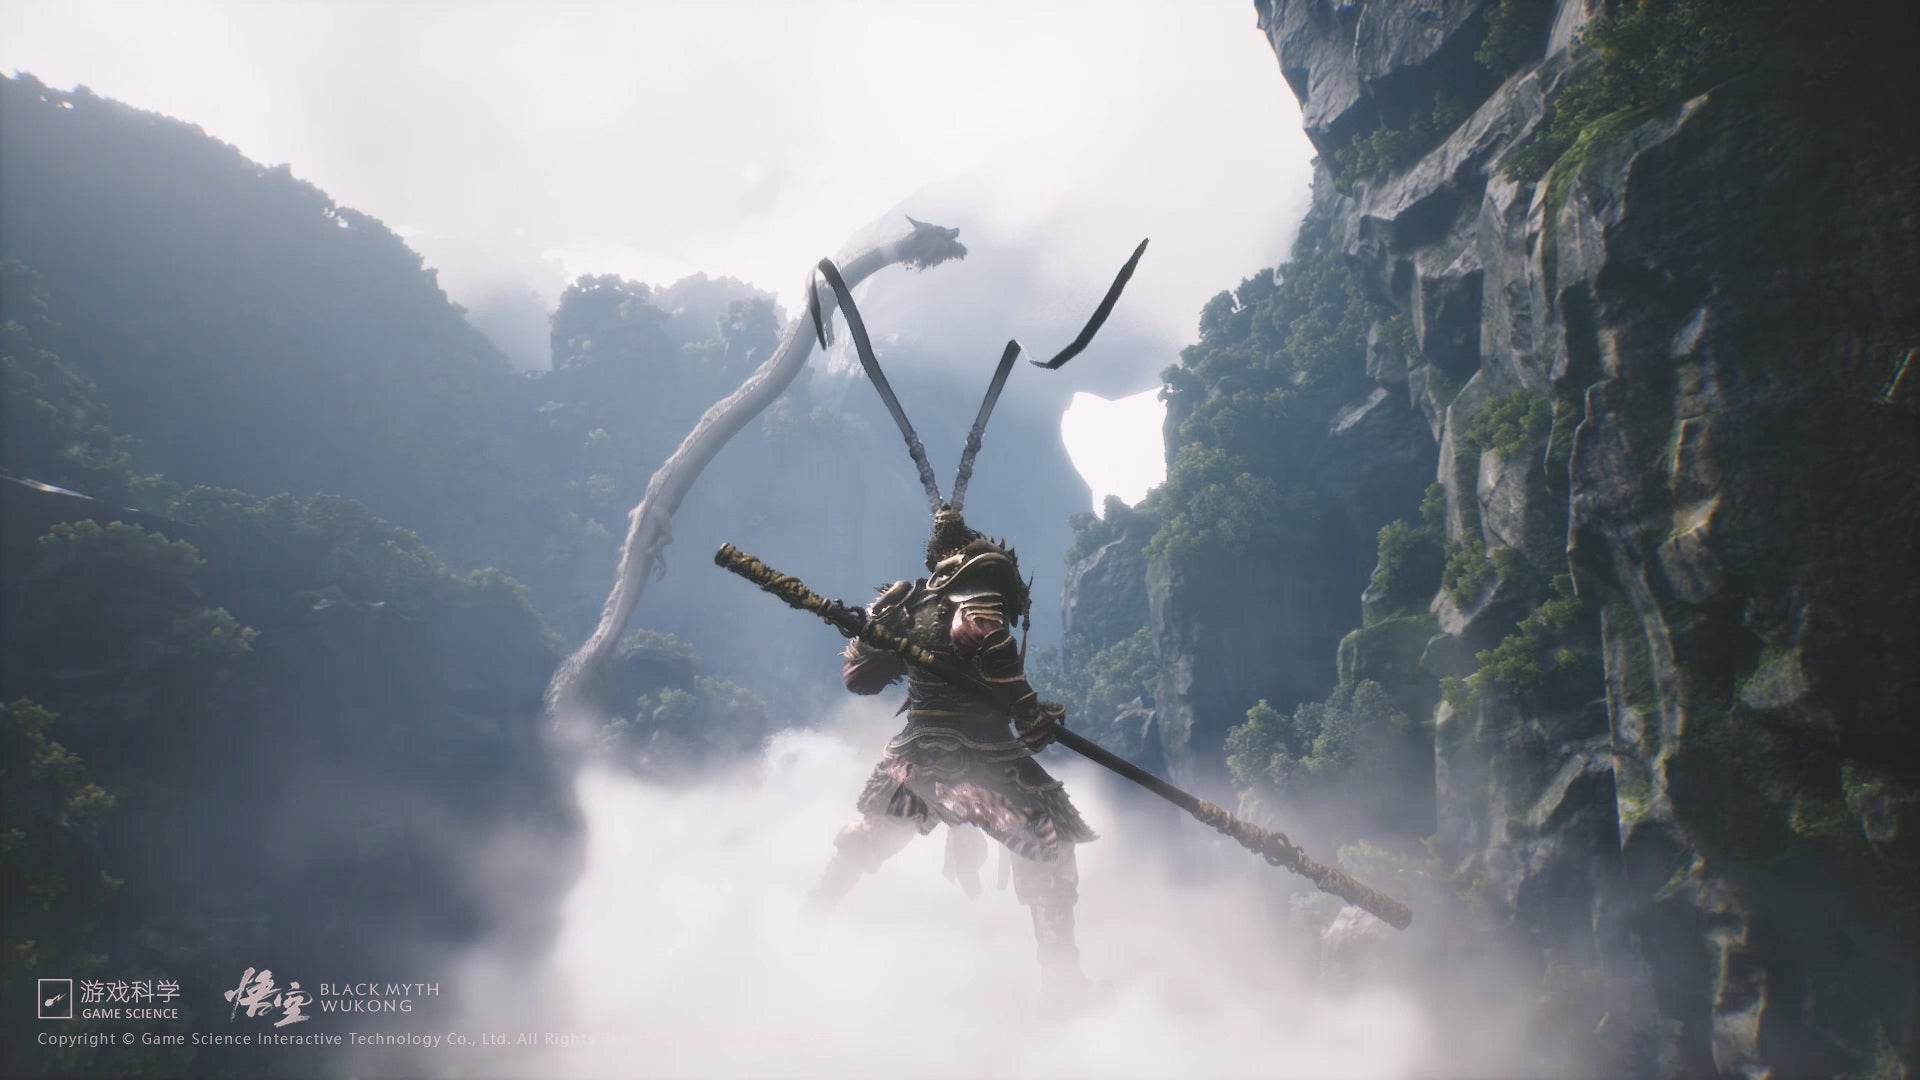 Image for Black Myth: Wukong upgraded to Unreal Engine 5, continues to look stunning